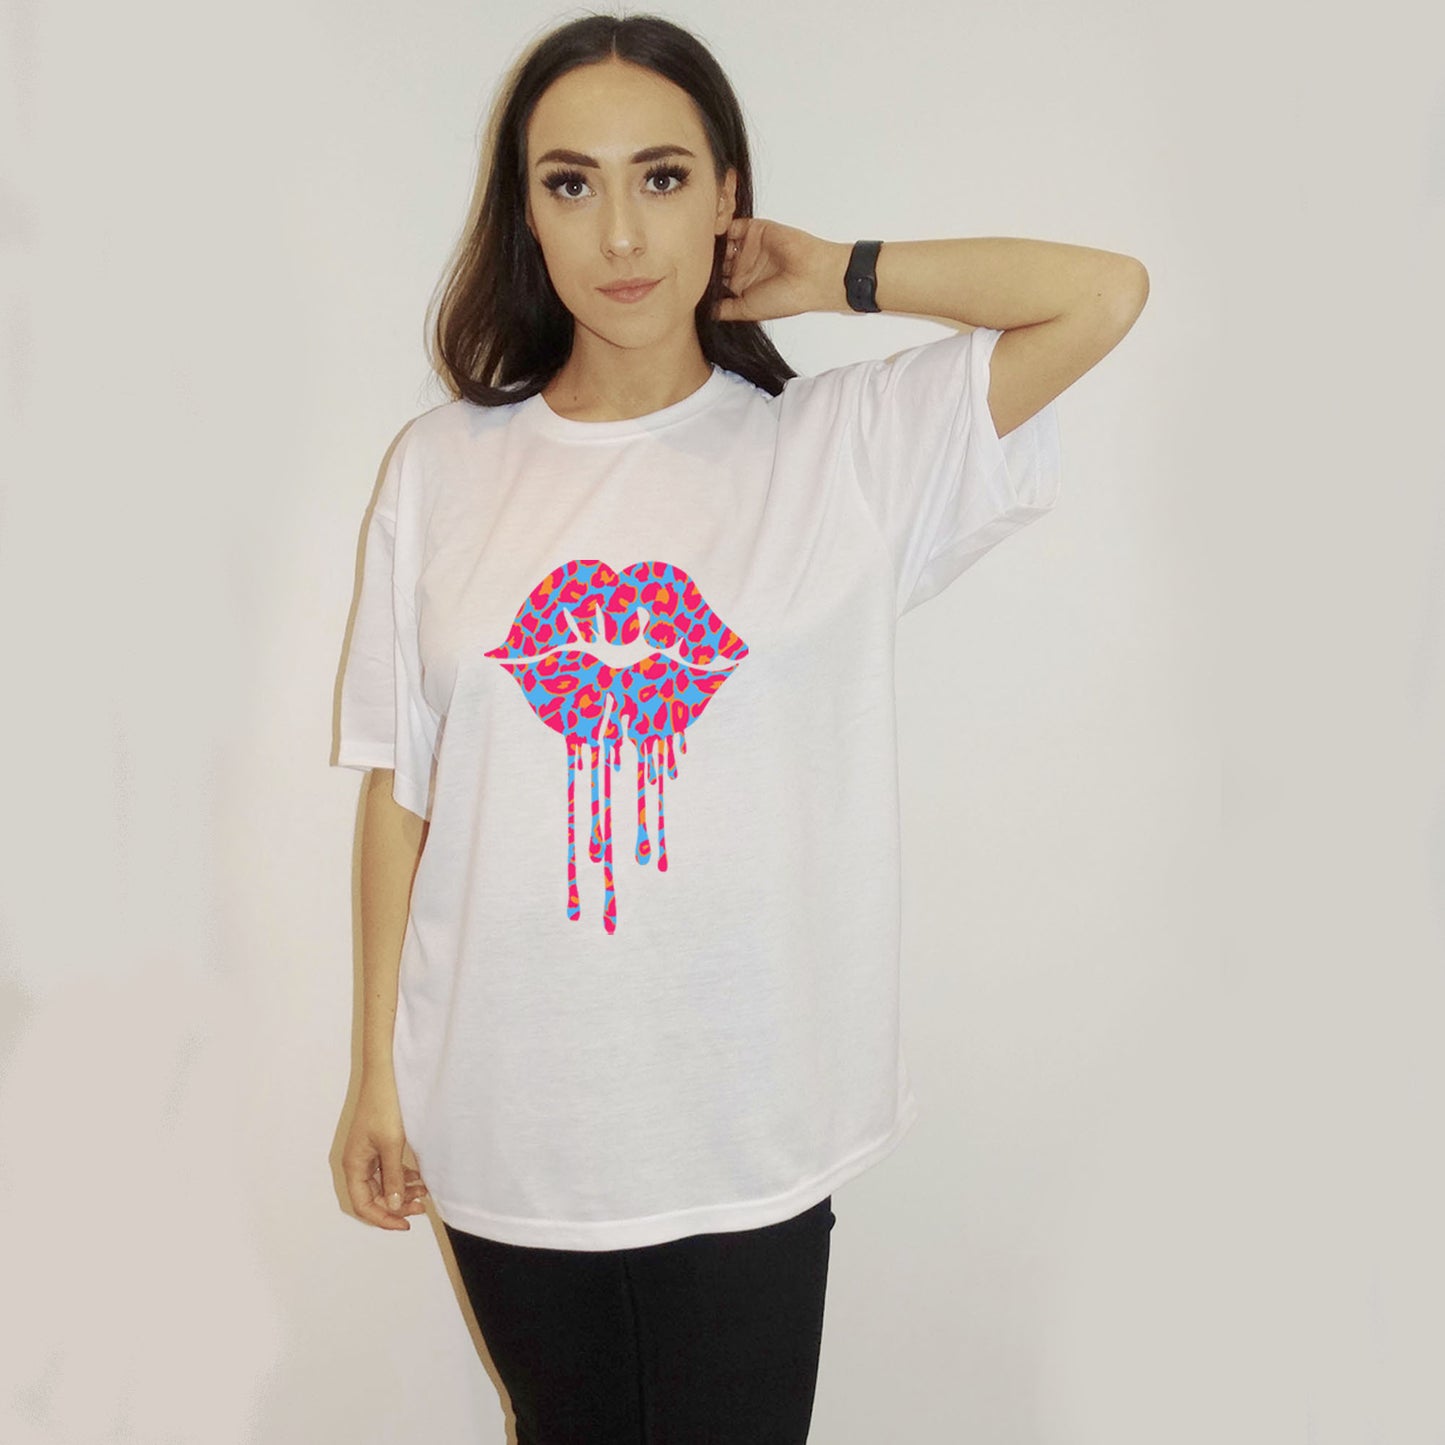 White Oversize Tshirt With Blue And Pink Leopard Craze Lip Drip Motif